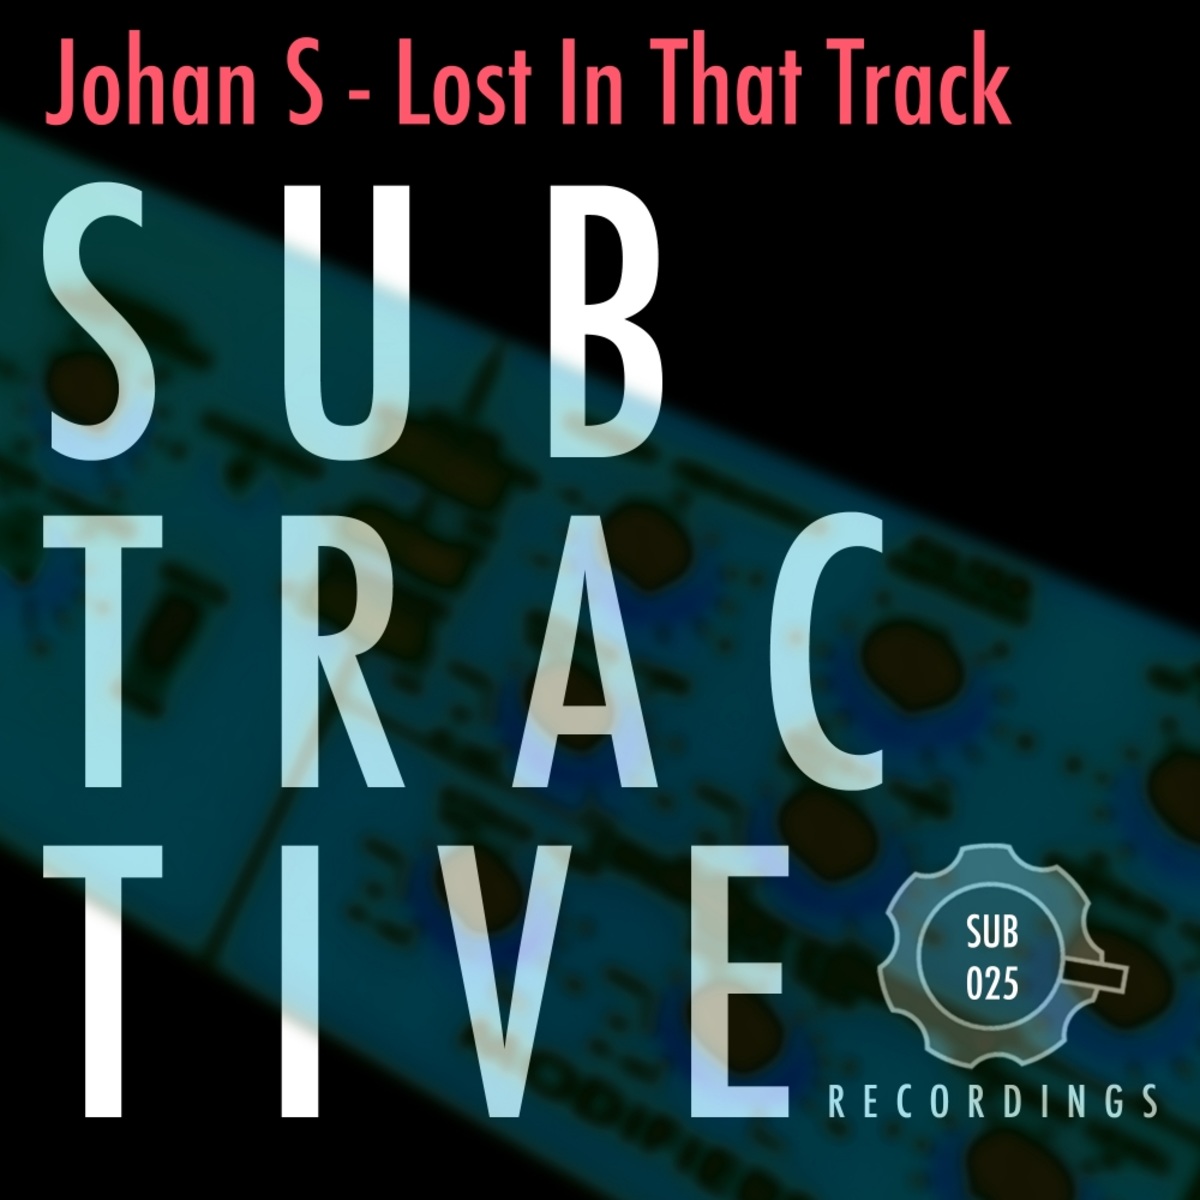 Johan S - Lost In That Track / Subtractive Recordings